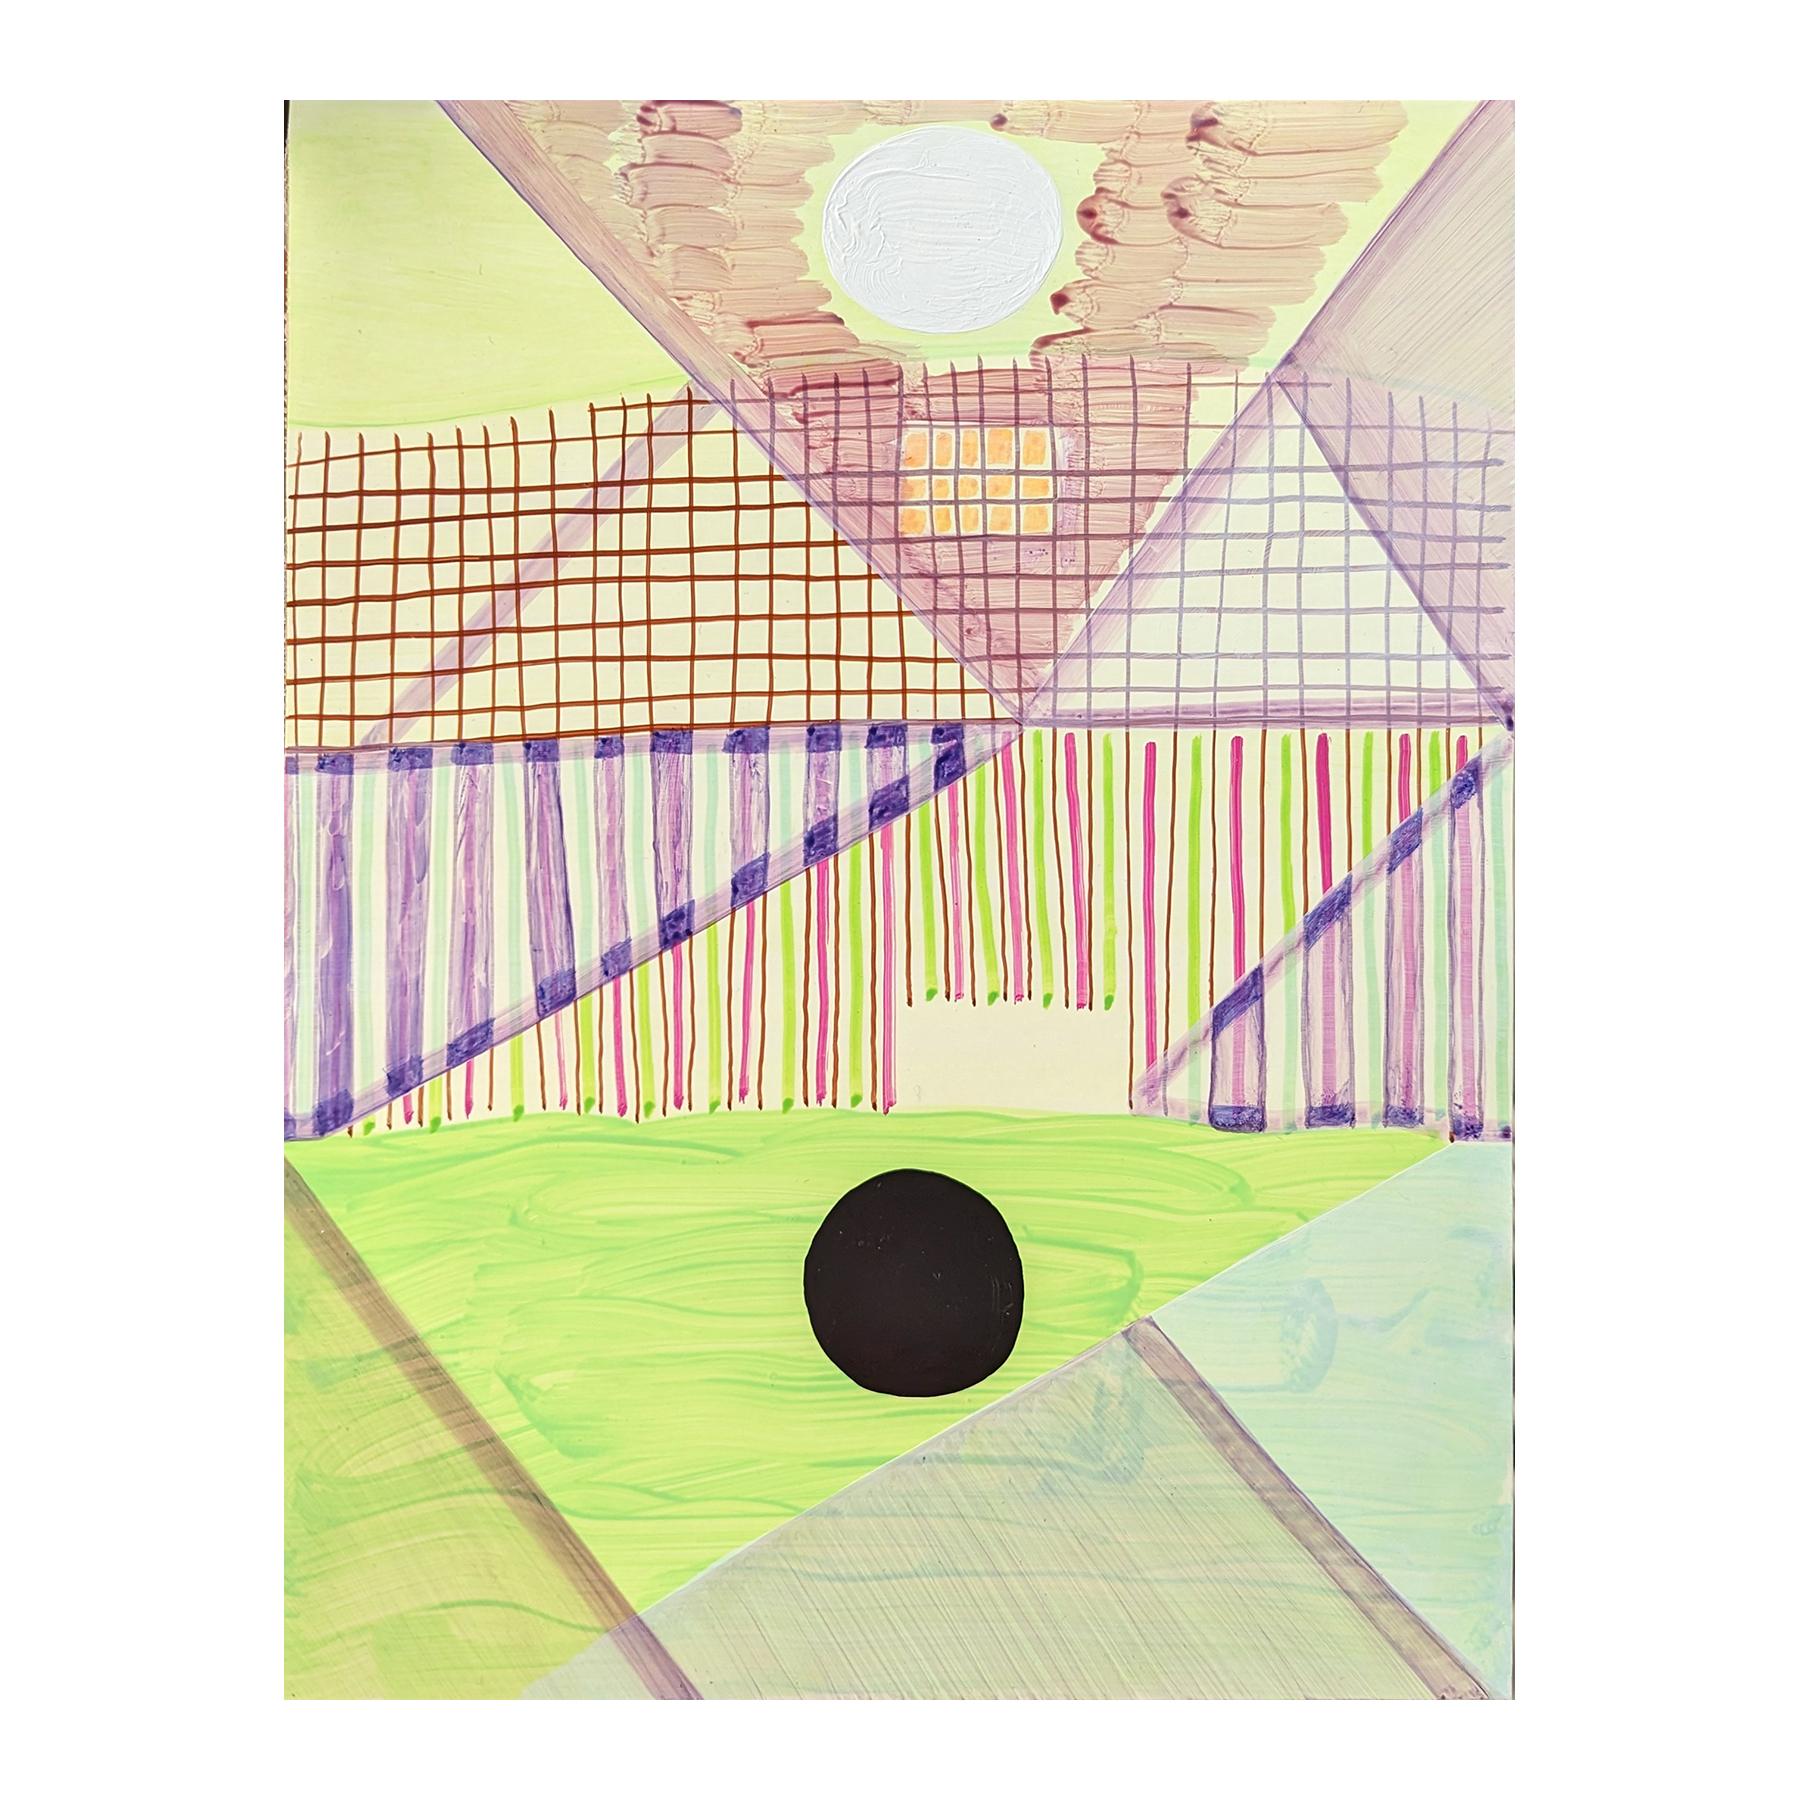 Contemporary abstract geometric colorful painting by Texas-based artist Max Manning. The work features organic and geometric shapes in pastel greens, pinks, and purples. Signed by the artist on the reverse. Currently unframed, but options are